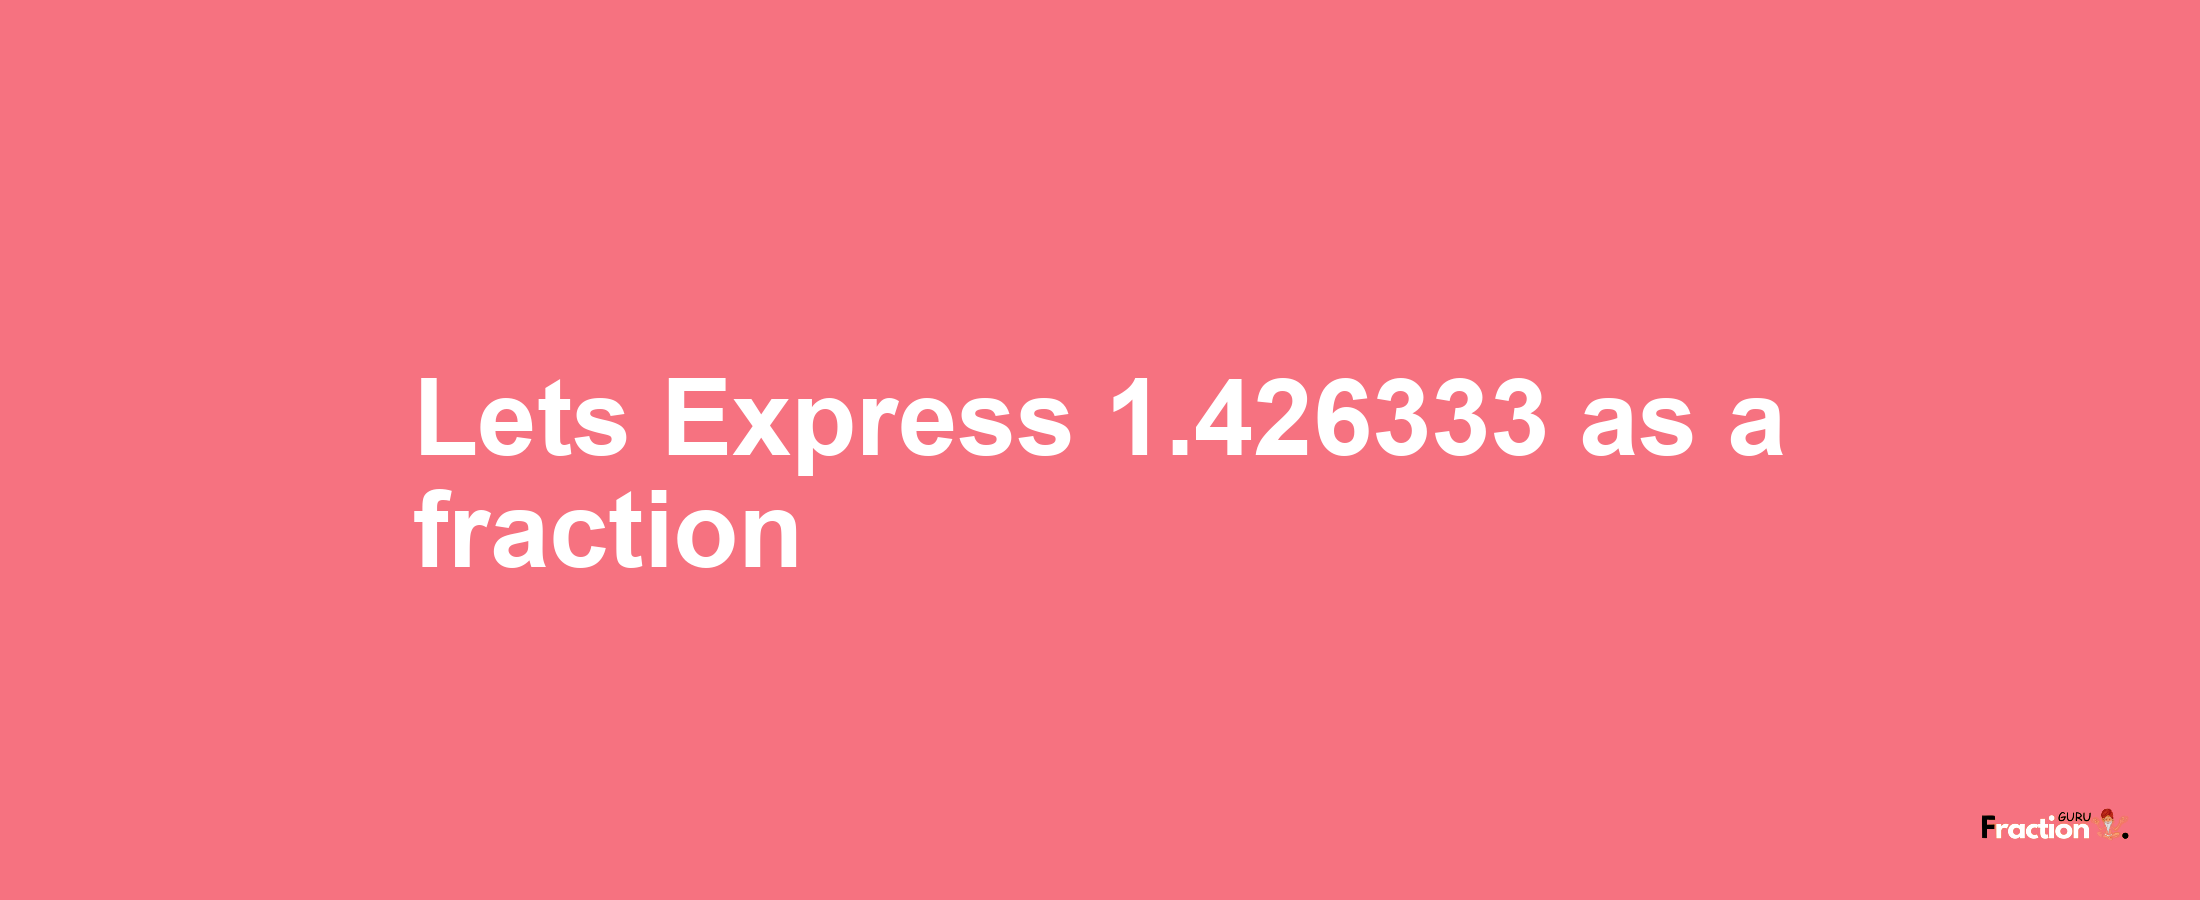 Lets Express 1.426333 as afraction